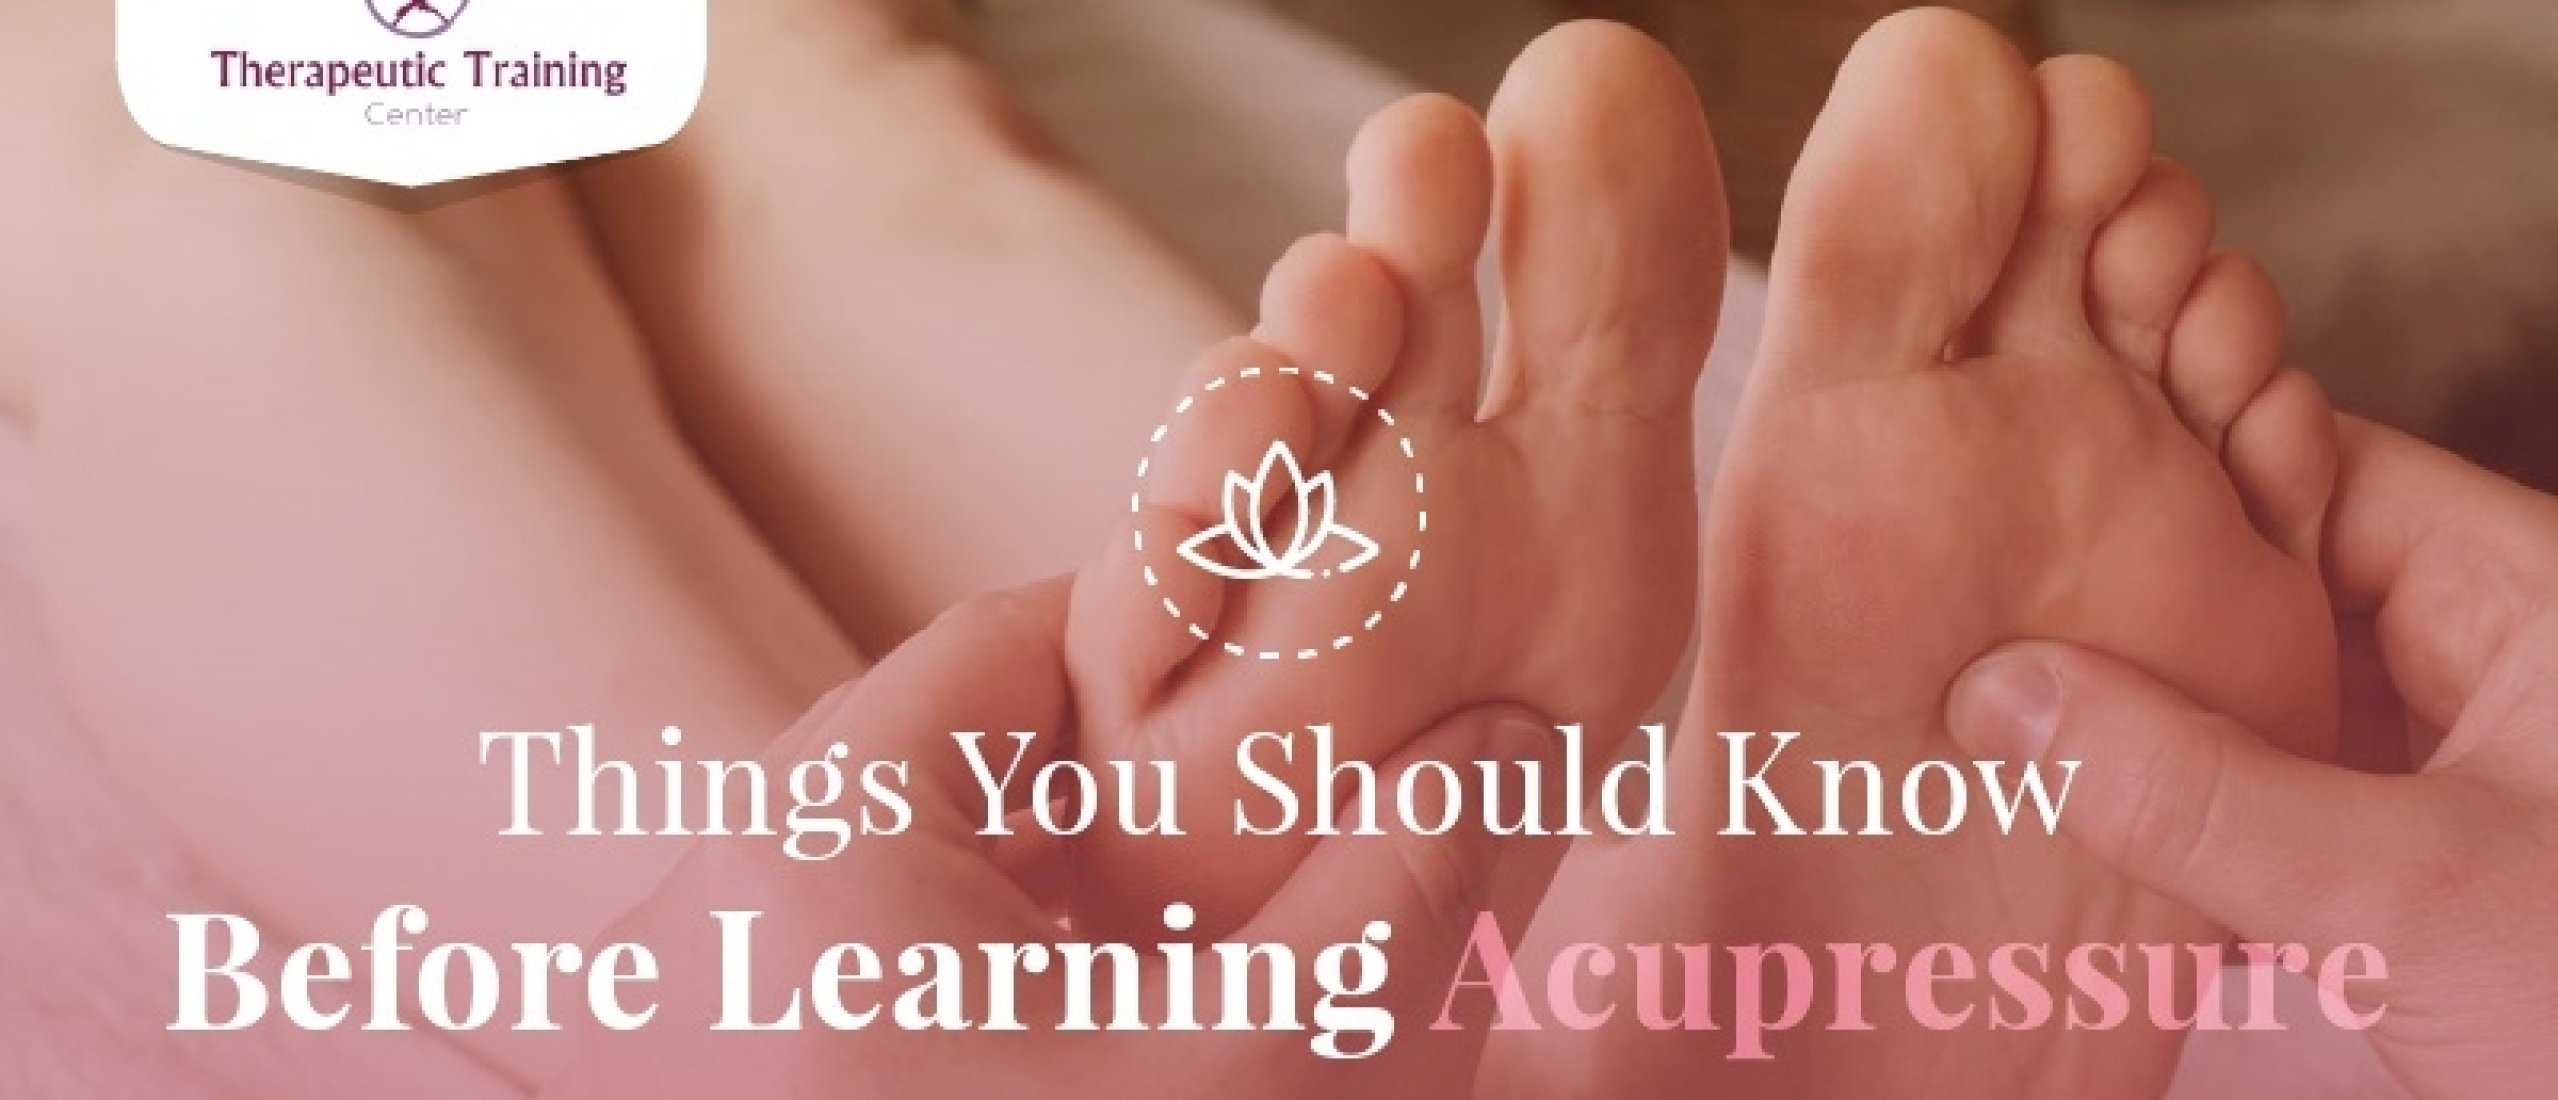 Things You Should Know Before Learning Acupressure